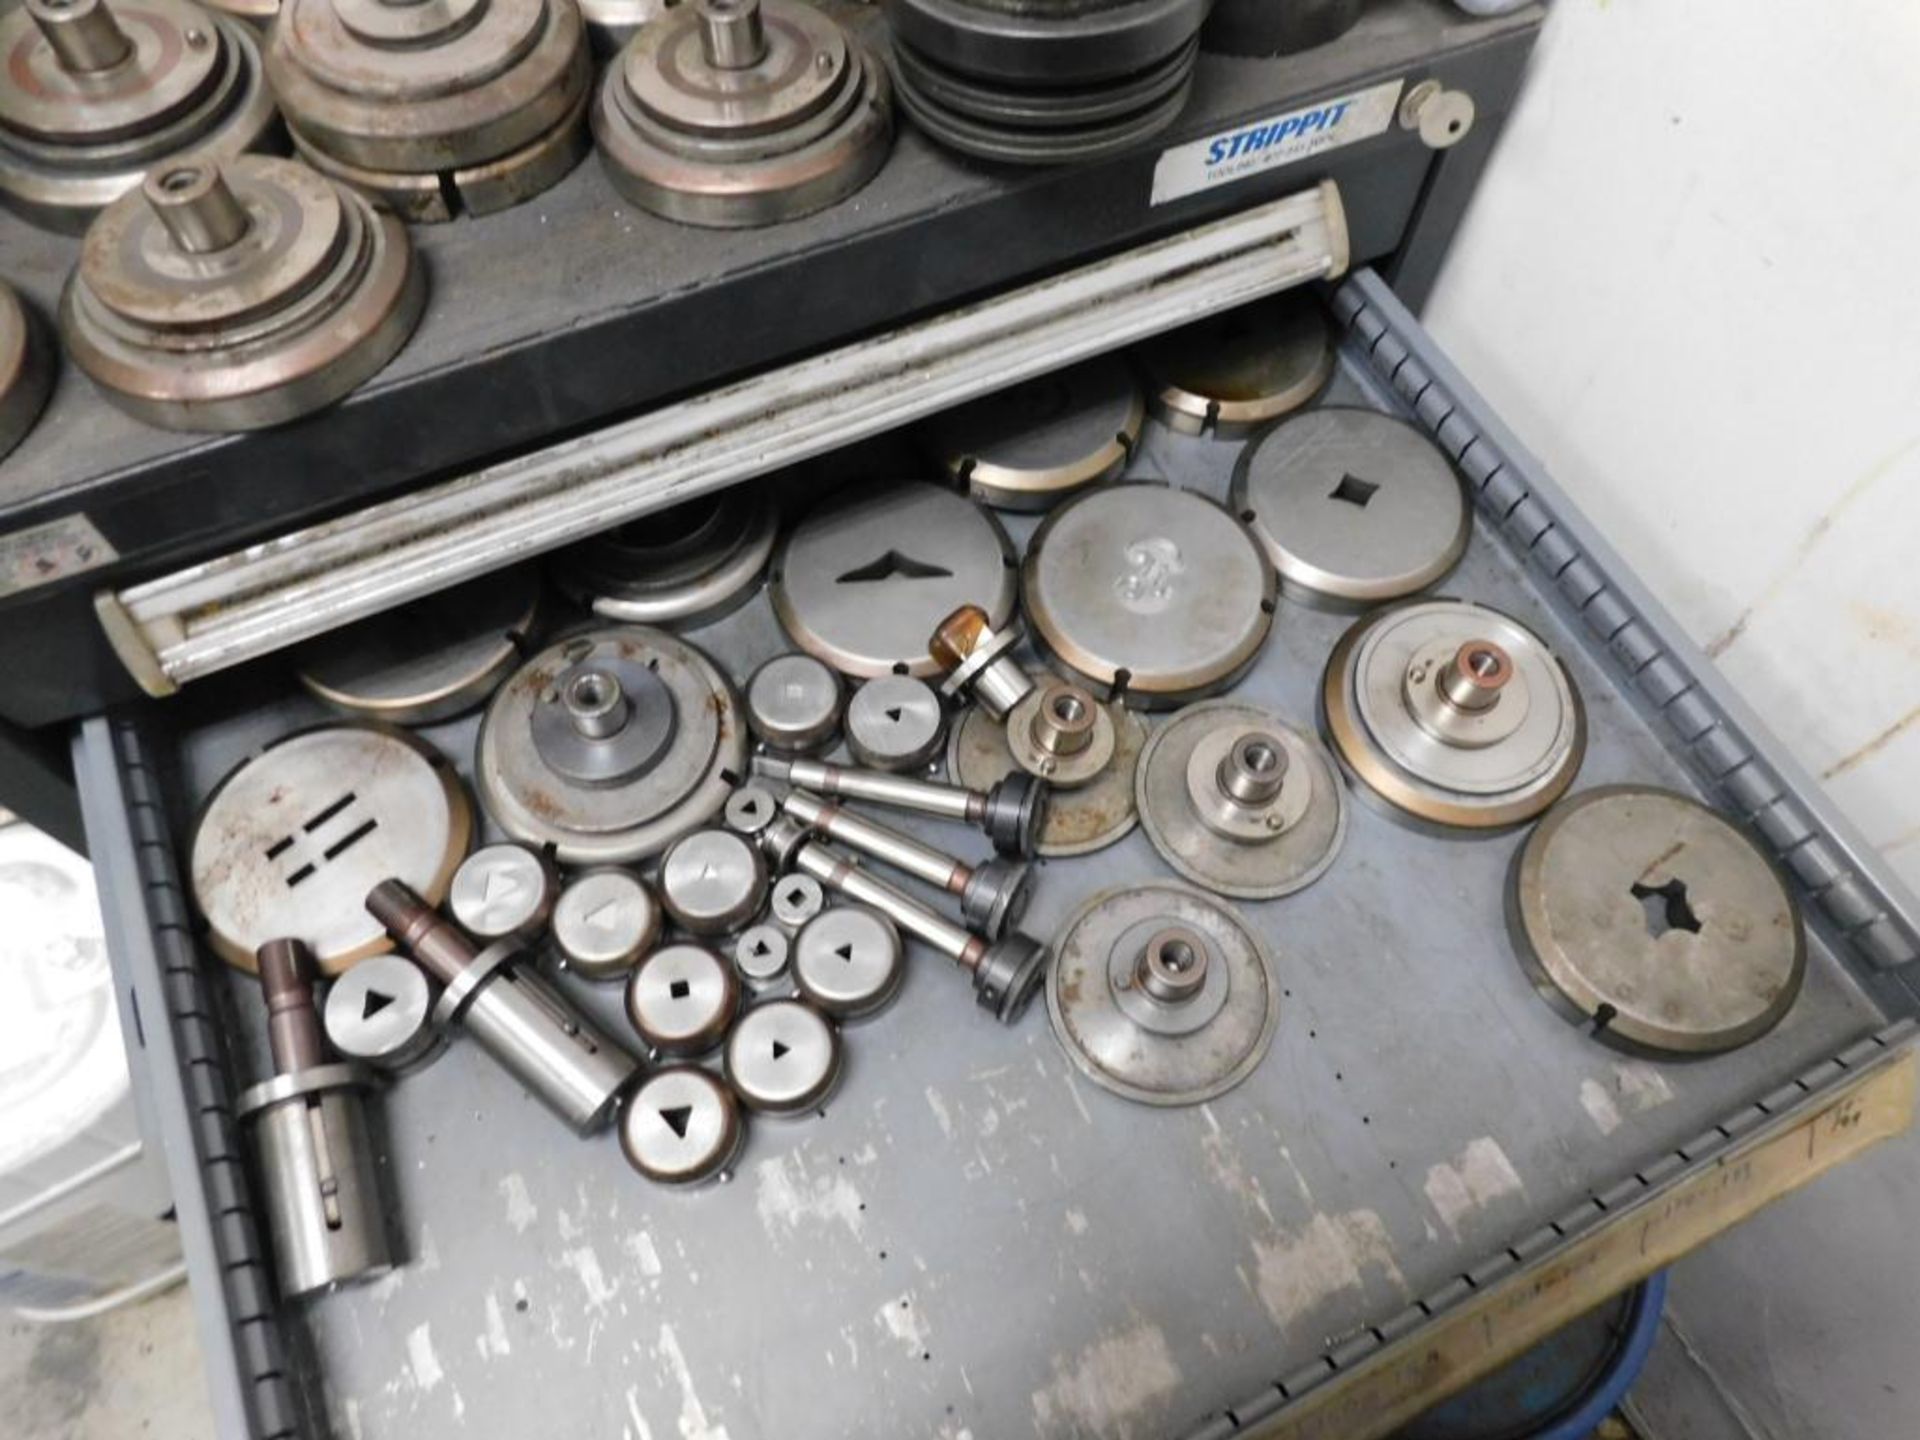 LOT: Large Quantity of Strippit Thin Turret Tooling - Image 15 of 19